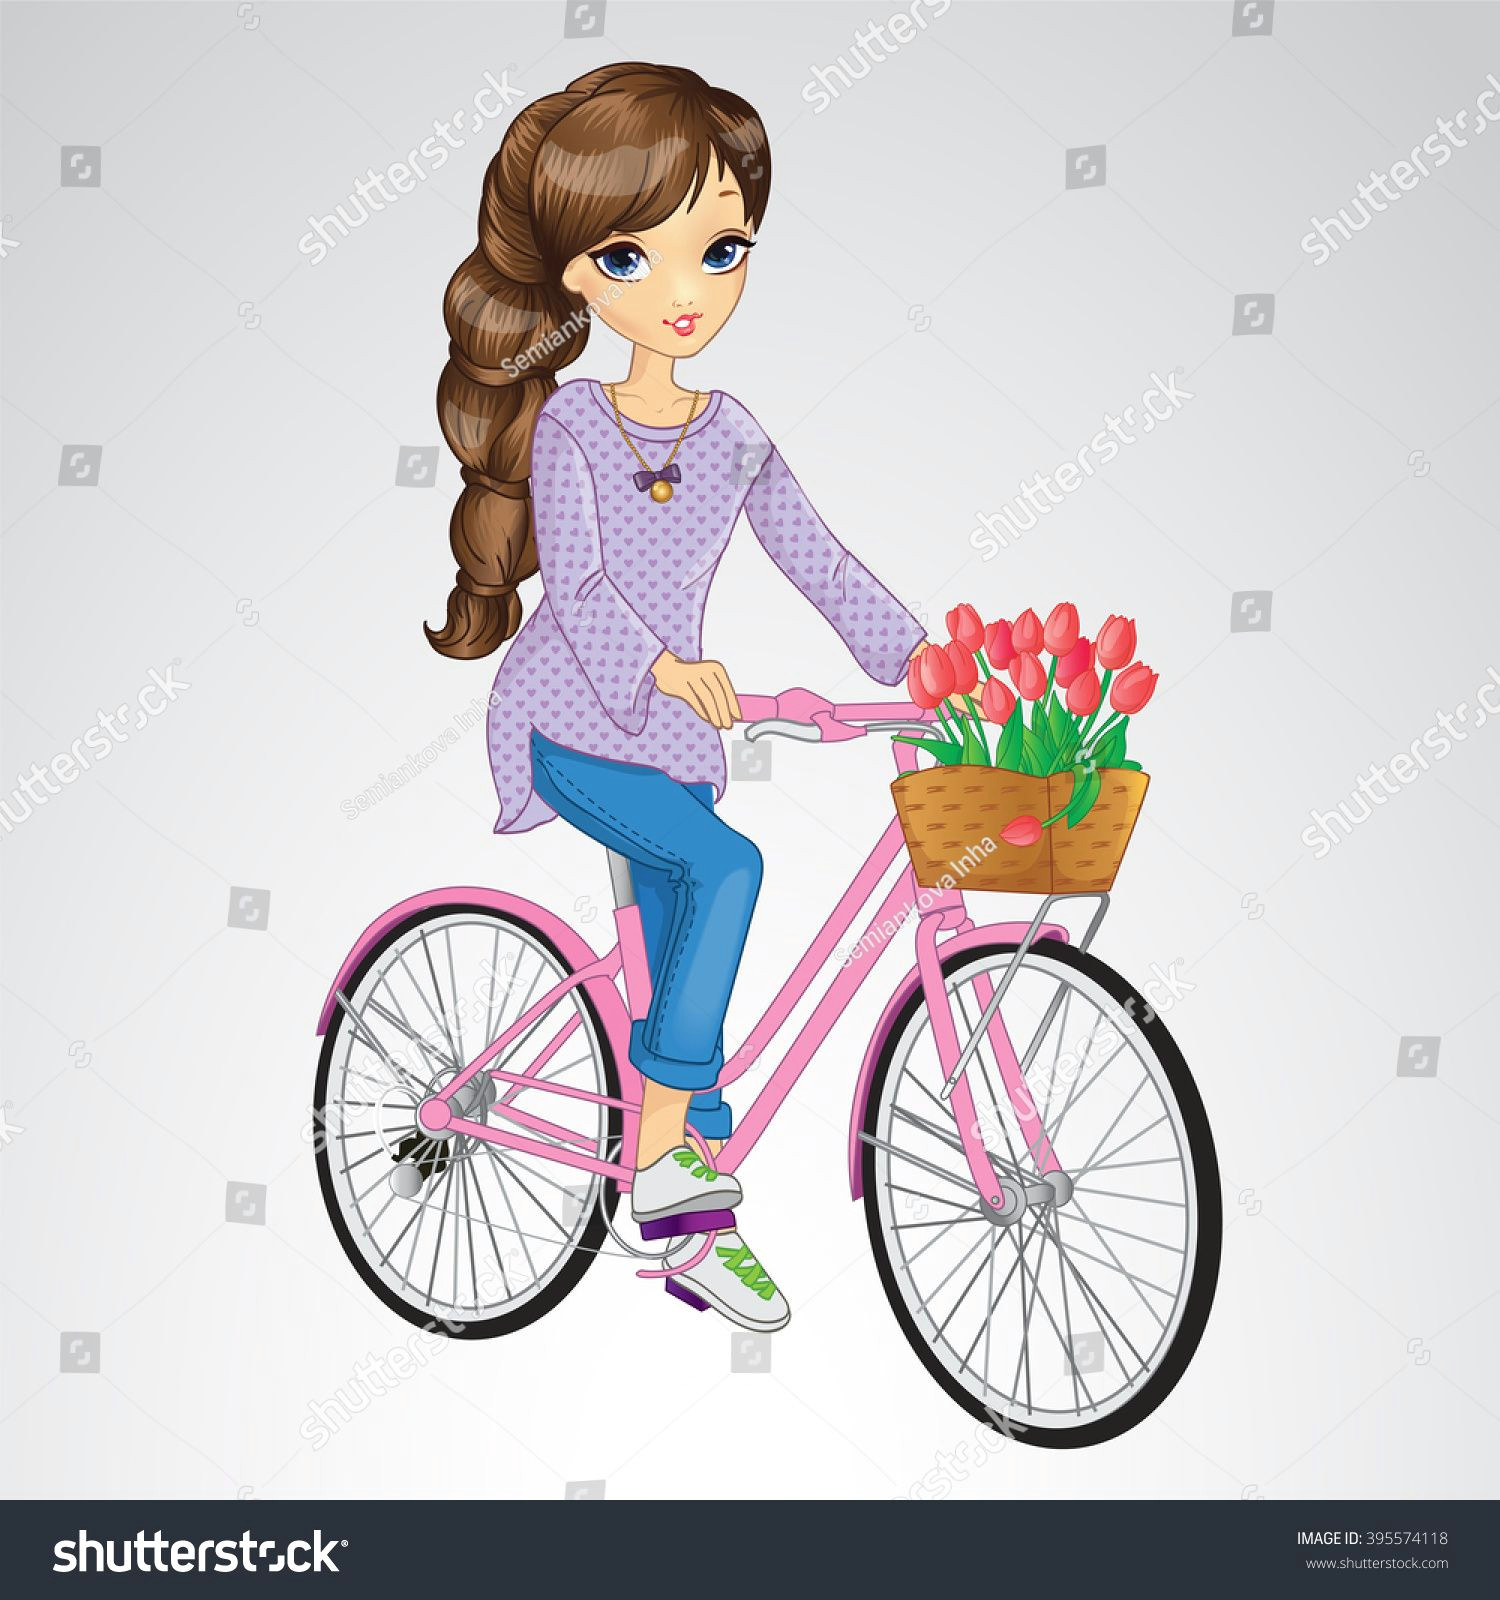 girl riding on pink bicycle